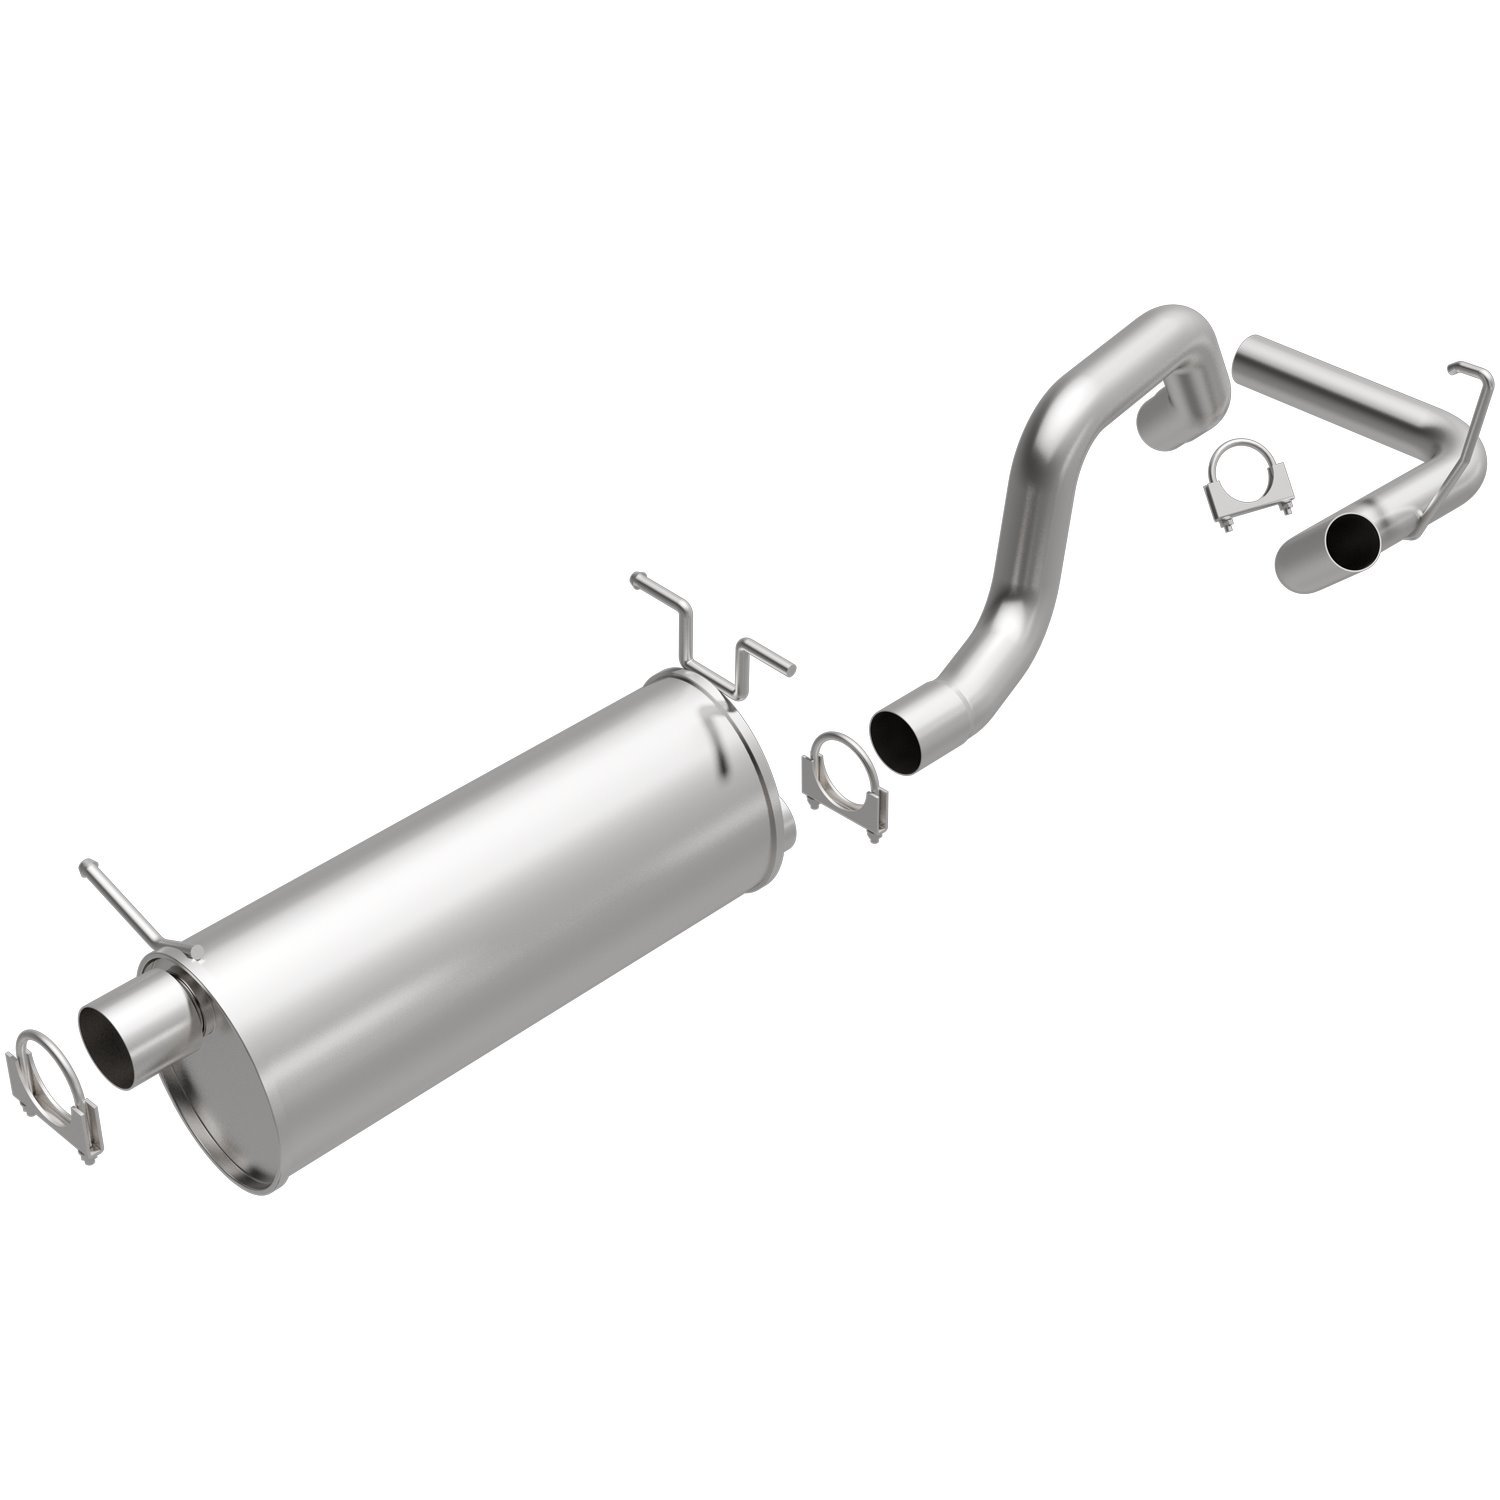 Direct-Fit Exhaust Kit, 1997-2005 Ford Ford Econoline/E-250/E-350 5.4L